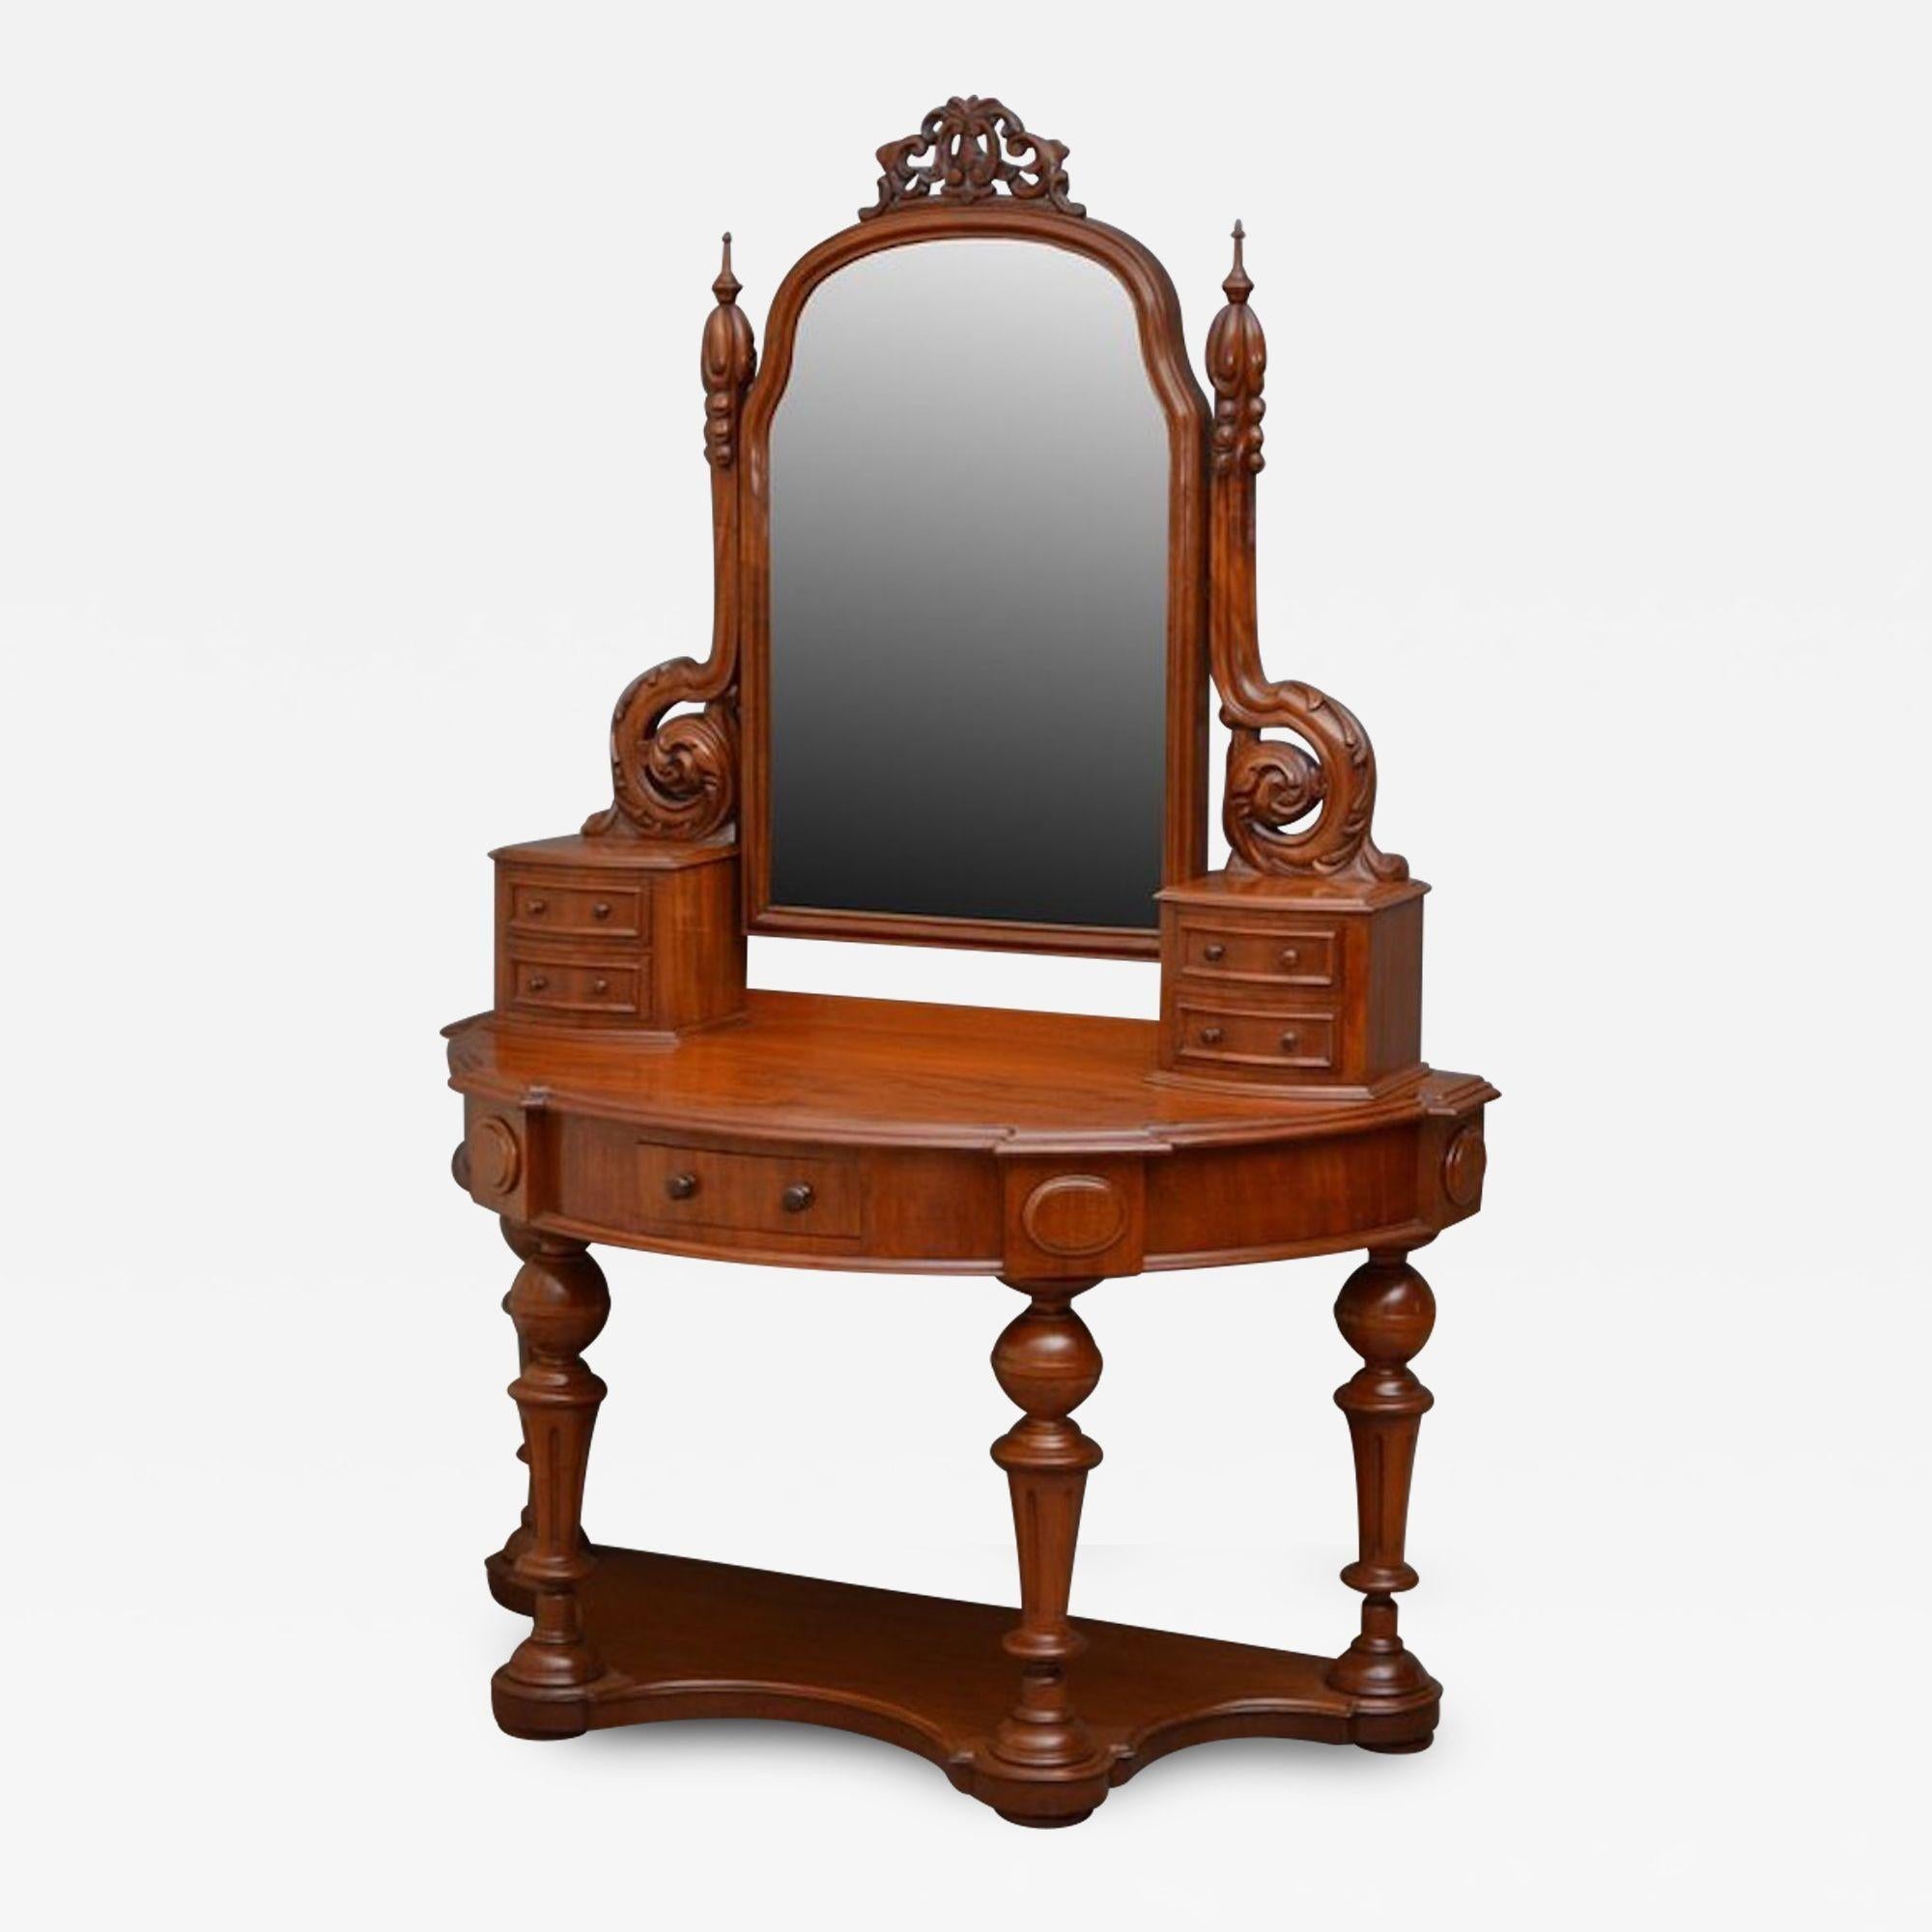 Sn3683, excellent Victorian mahogany dressing table, duchess Stand, having original mirror plate in shaped and moulded frame with carving to top, finely carved supports terminating in small bowed and moulded drawers, fitted with original turned